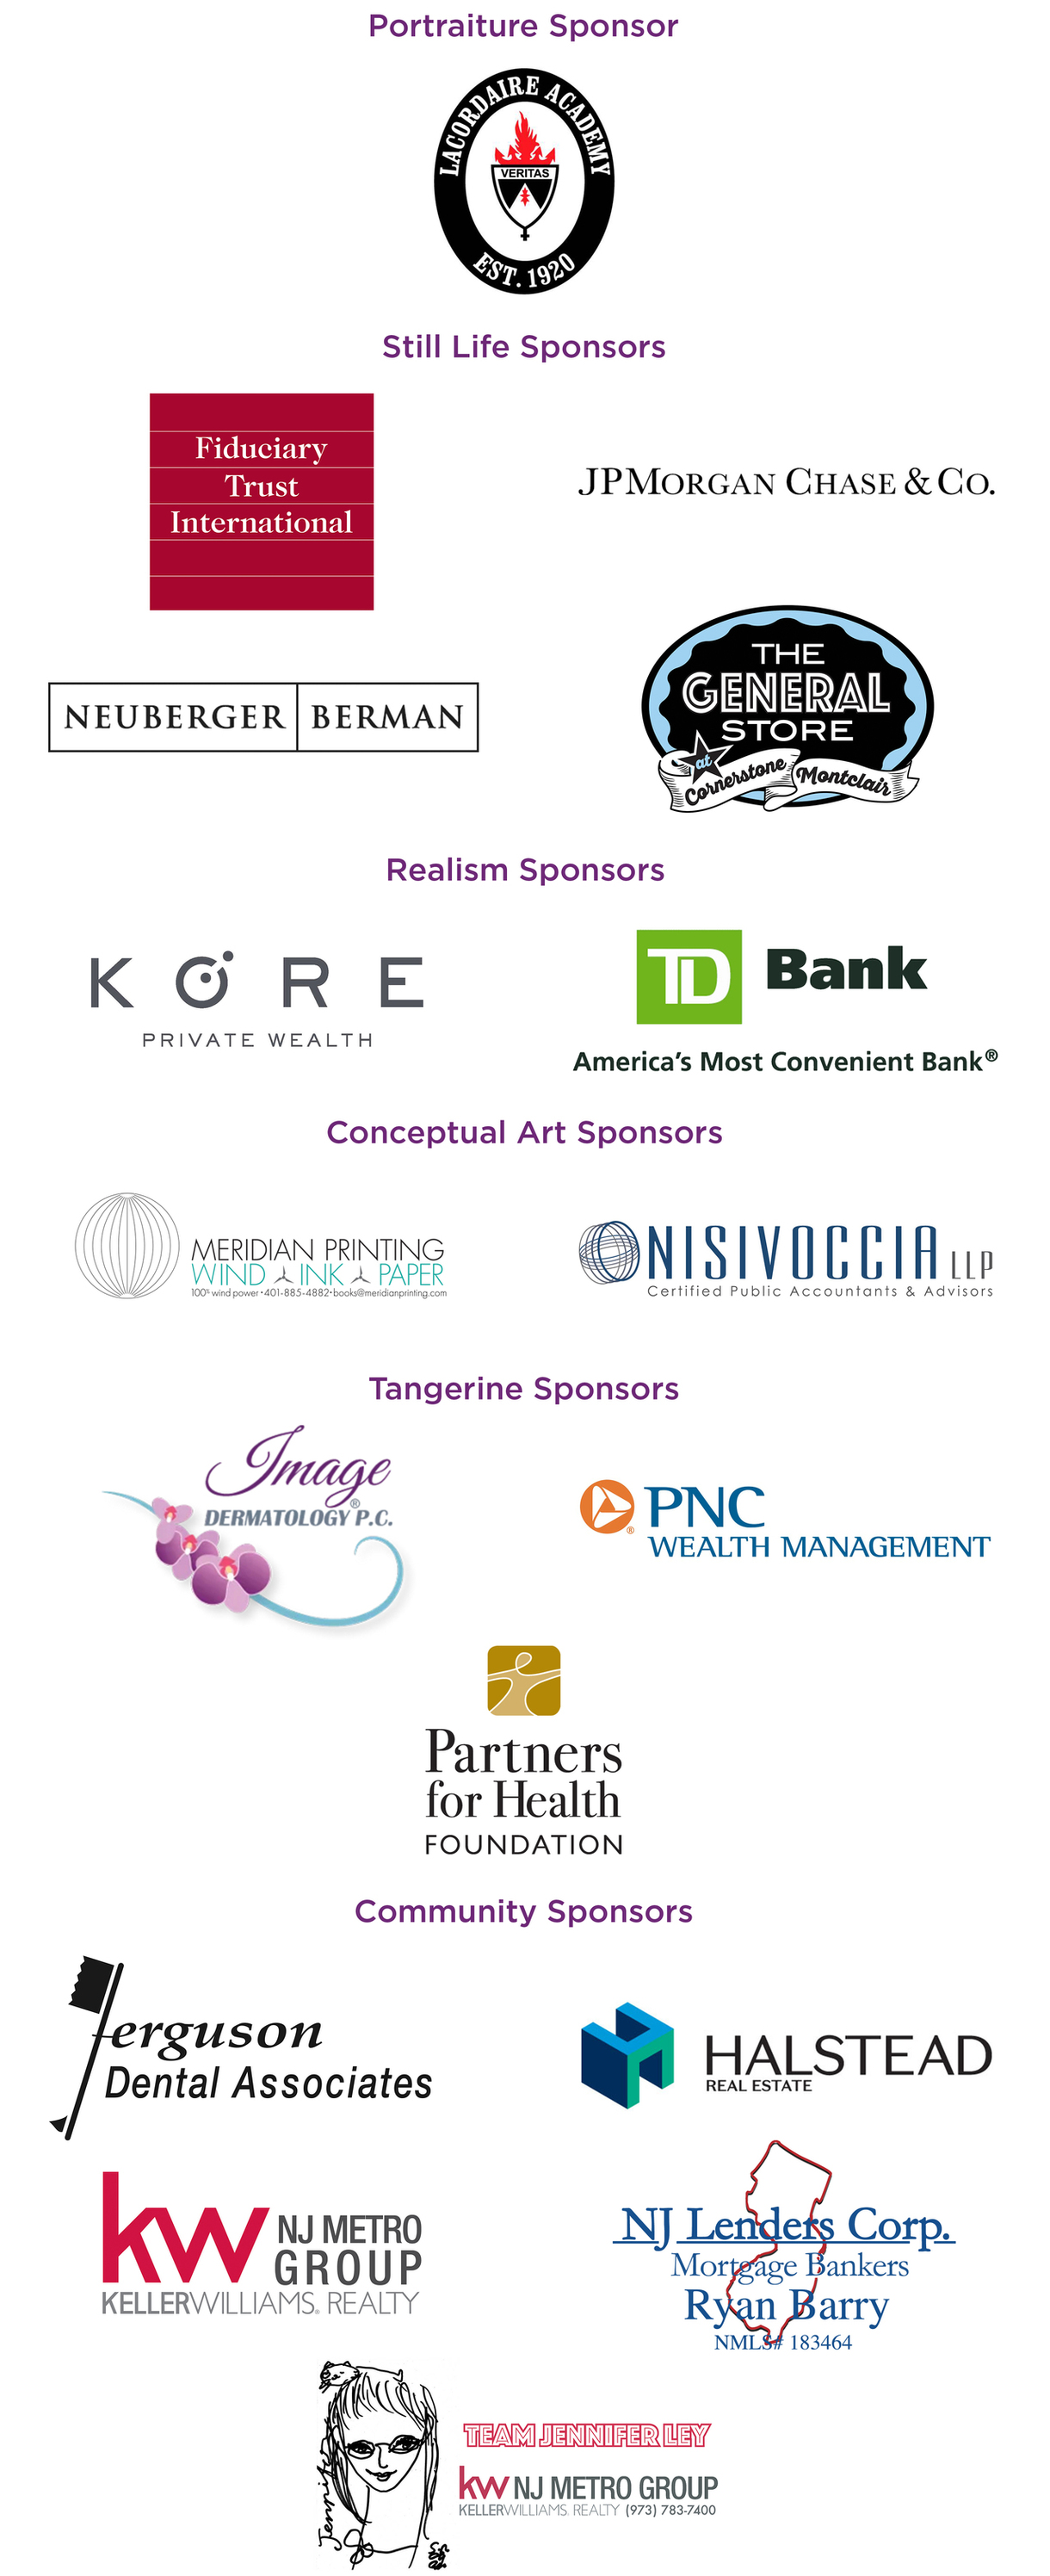 Te art party sponsor logos. These sponsors are the same as those listed in text on this page.